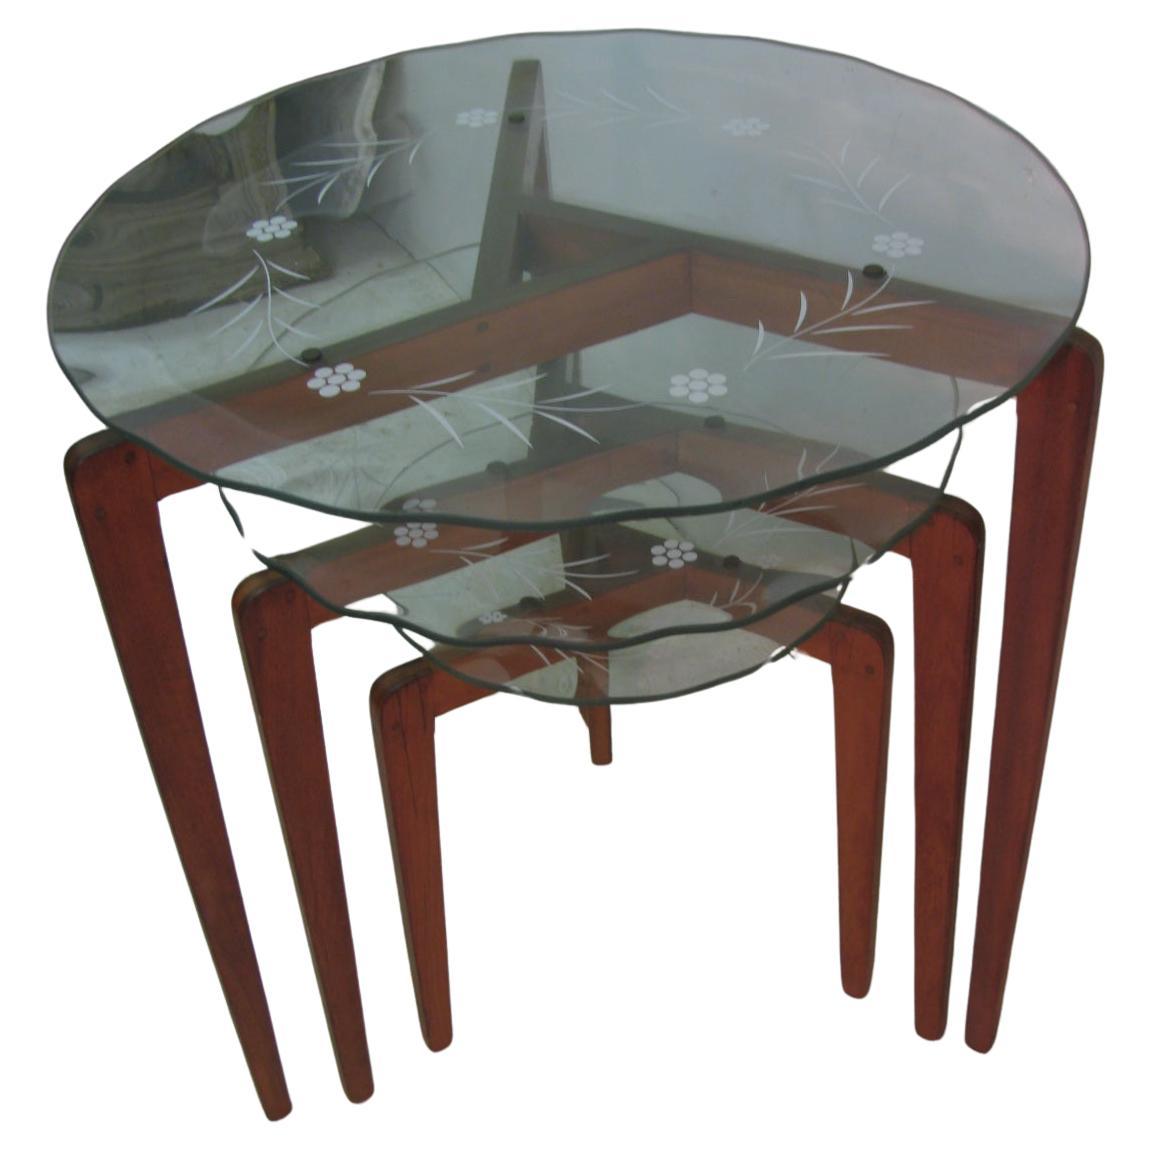 Etched Mid-Century Modern Italian Art Glass Nesting Tables Set of 3 For Sale